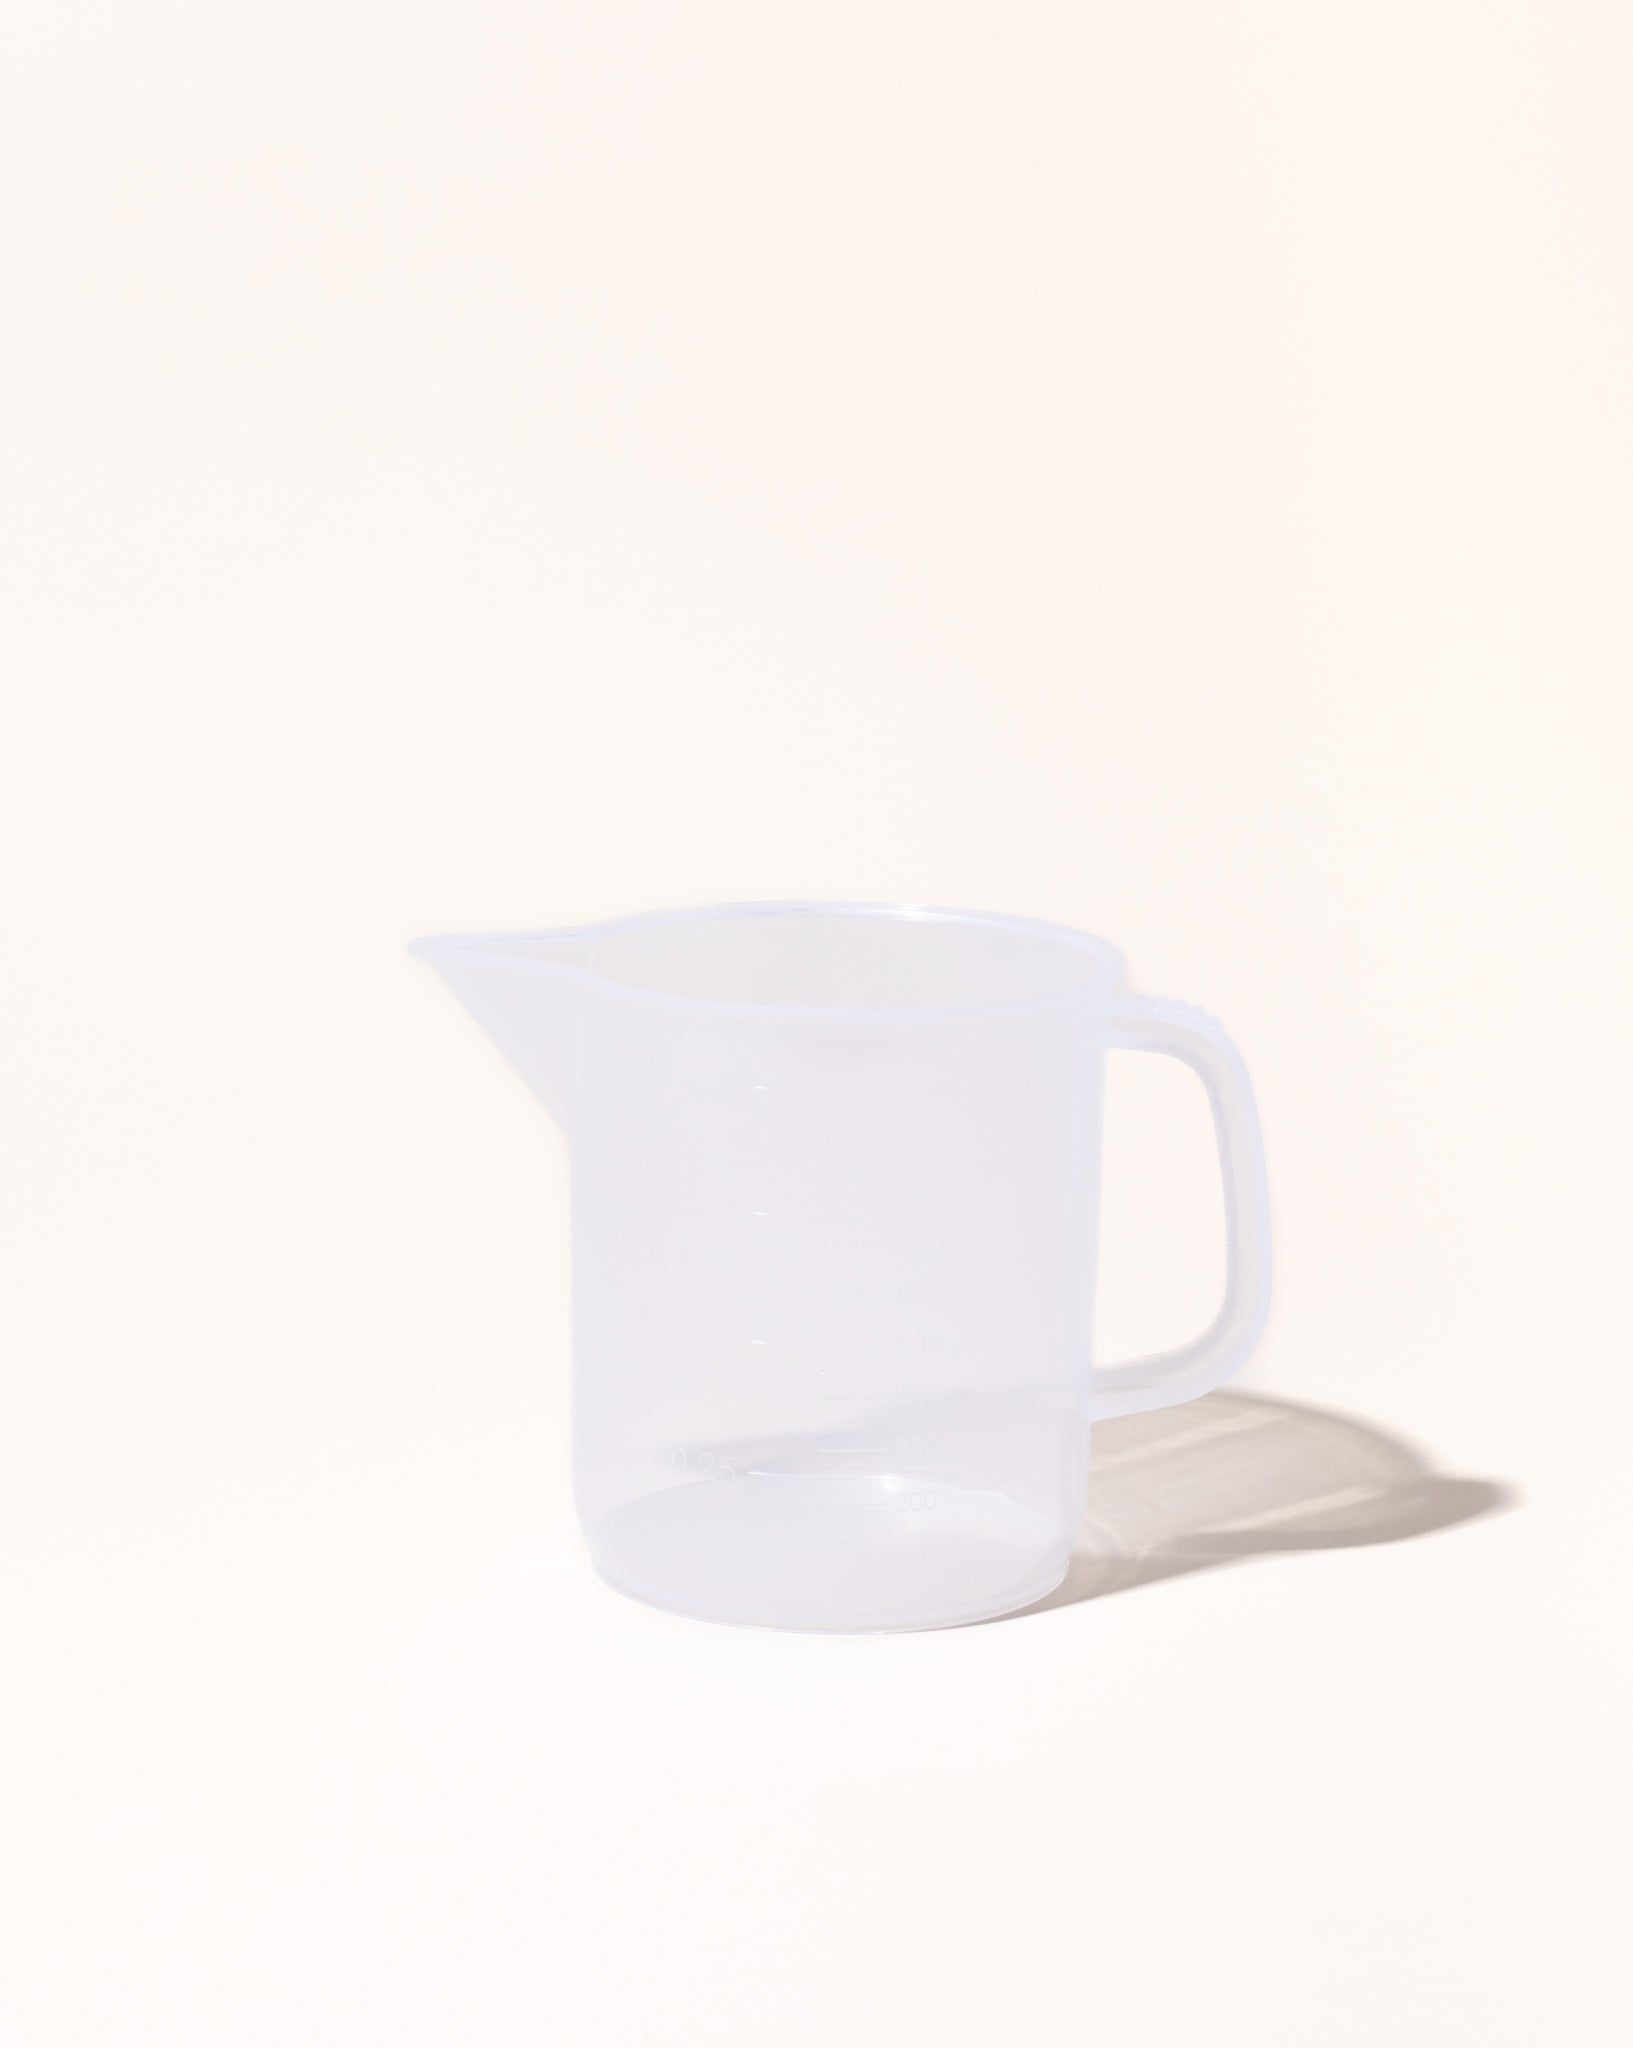 1000ml pouring pitcher